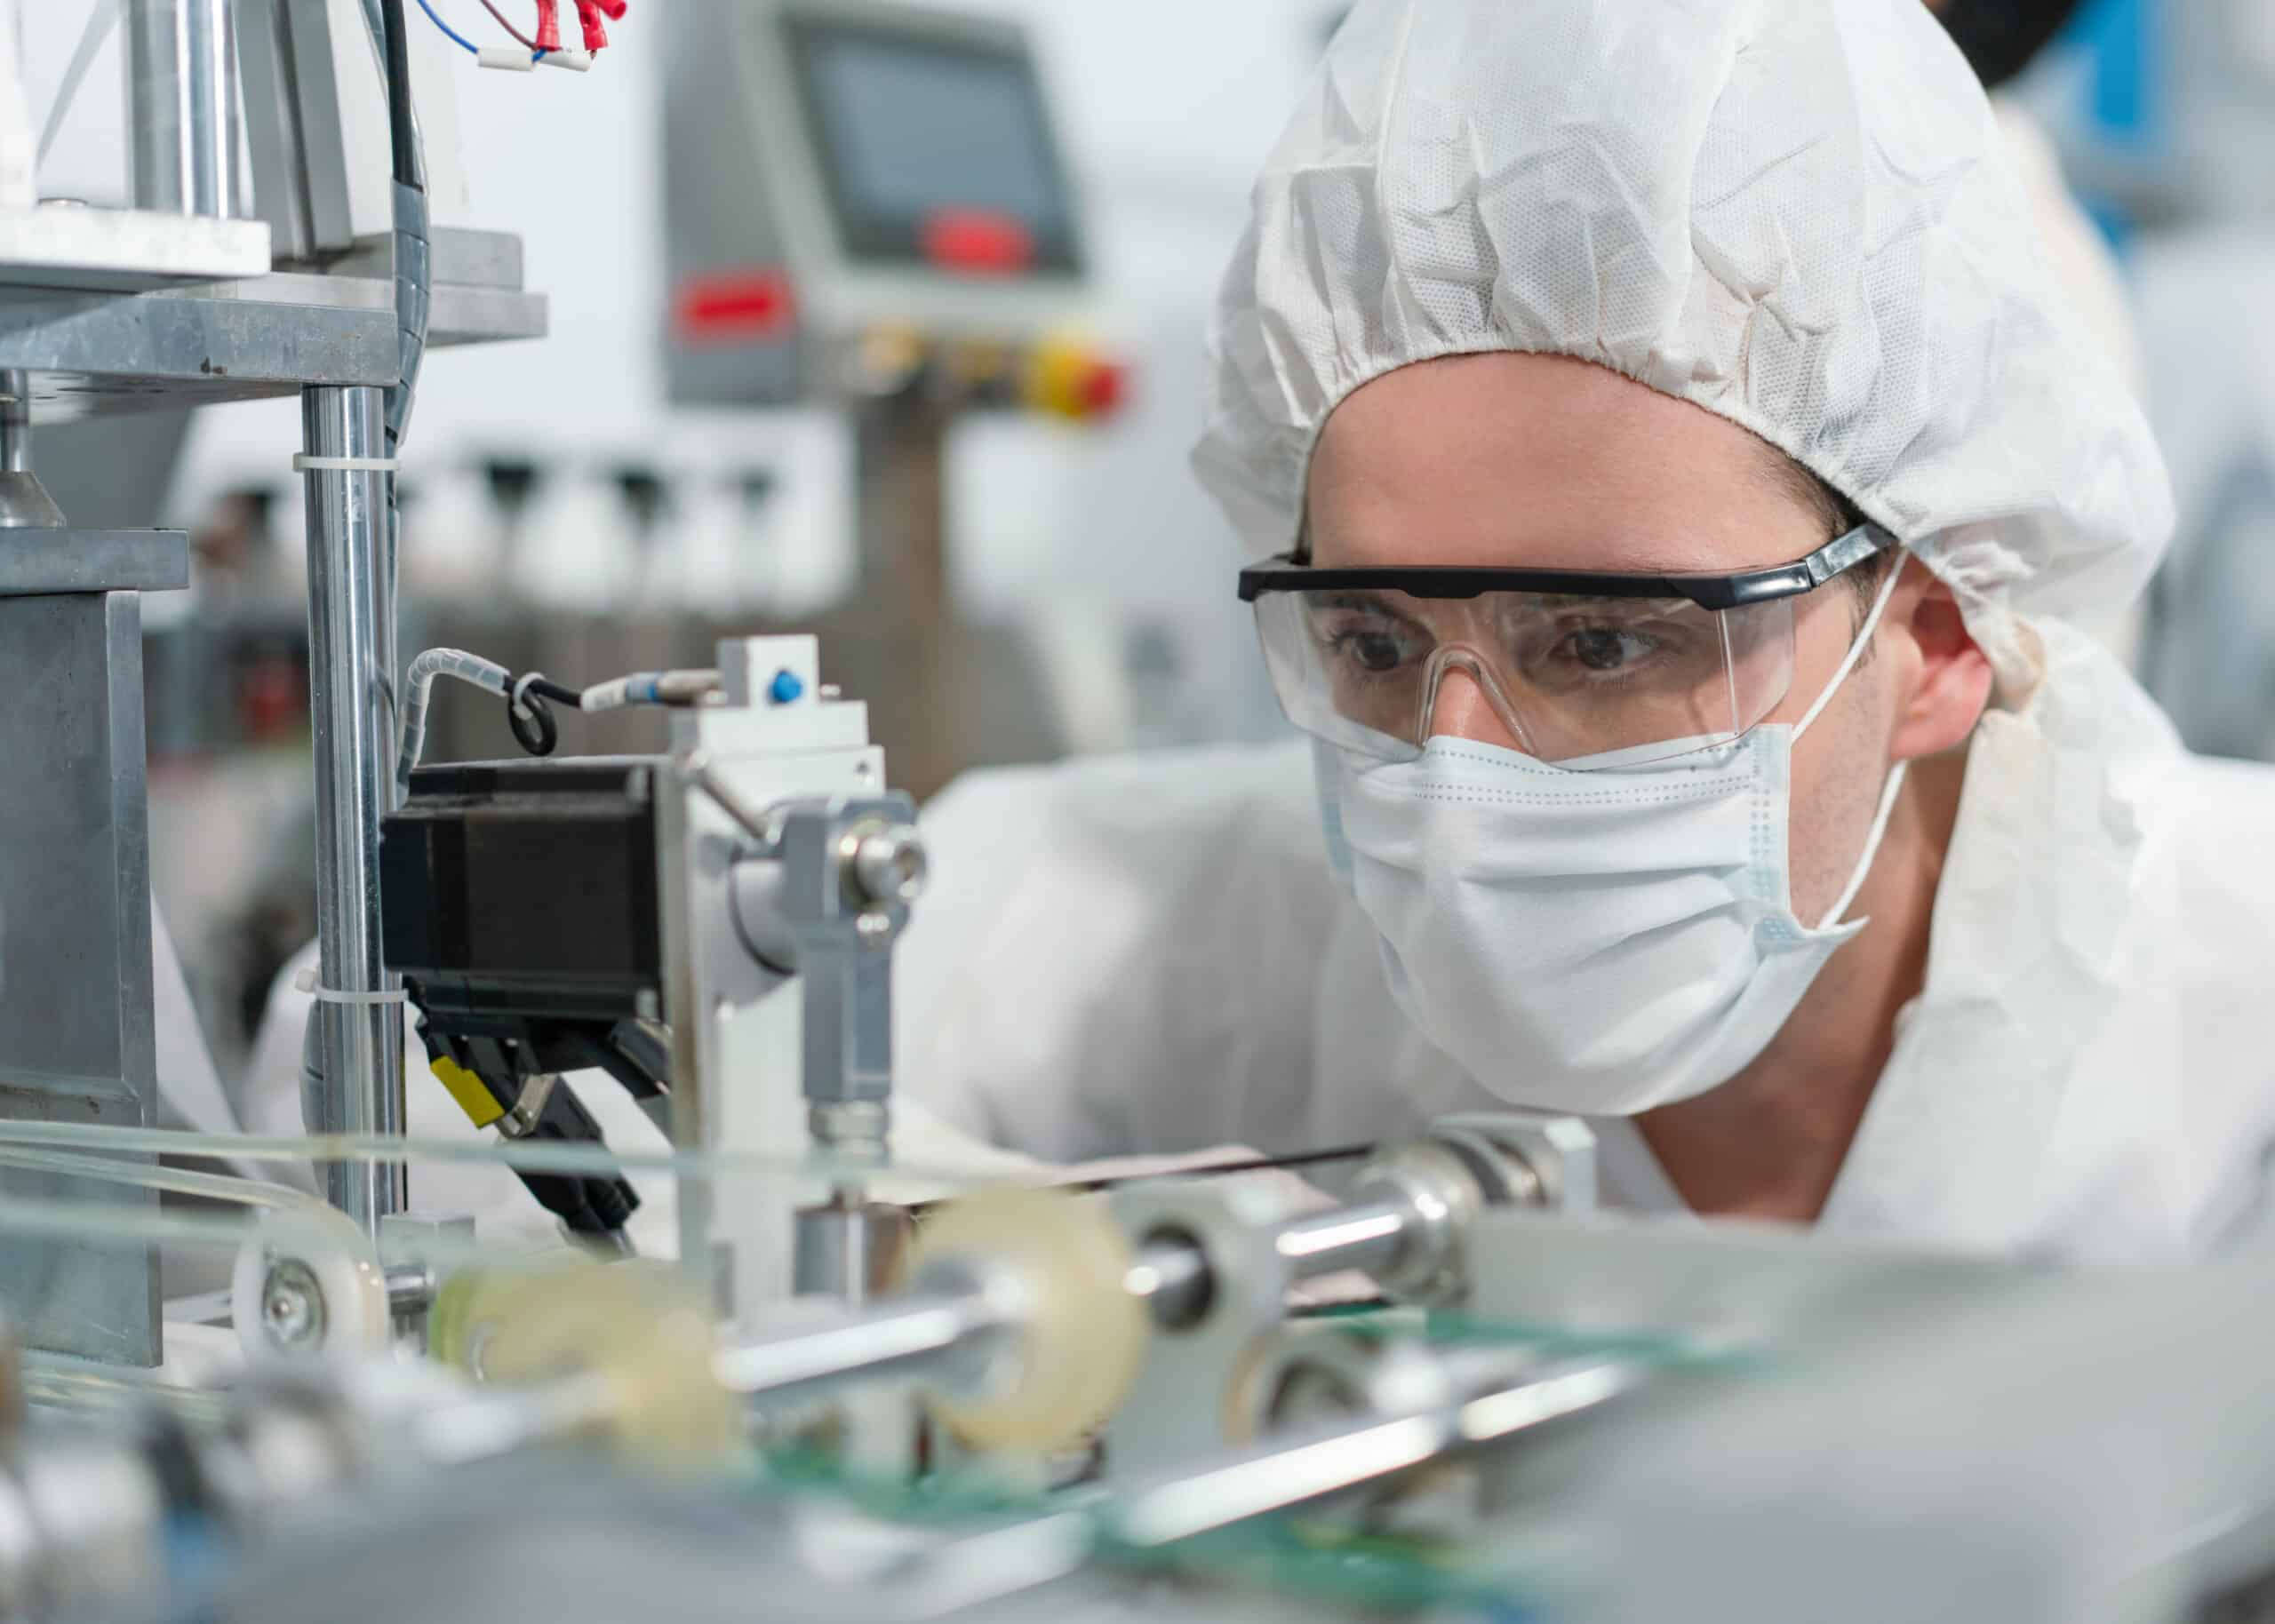 A man in personal protective equipment closely observing medical device production machinery